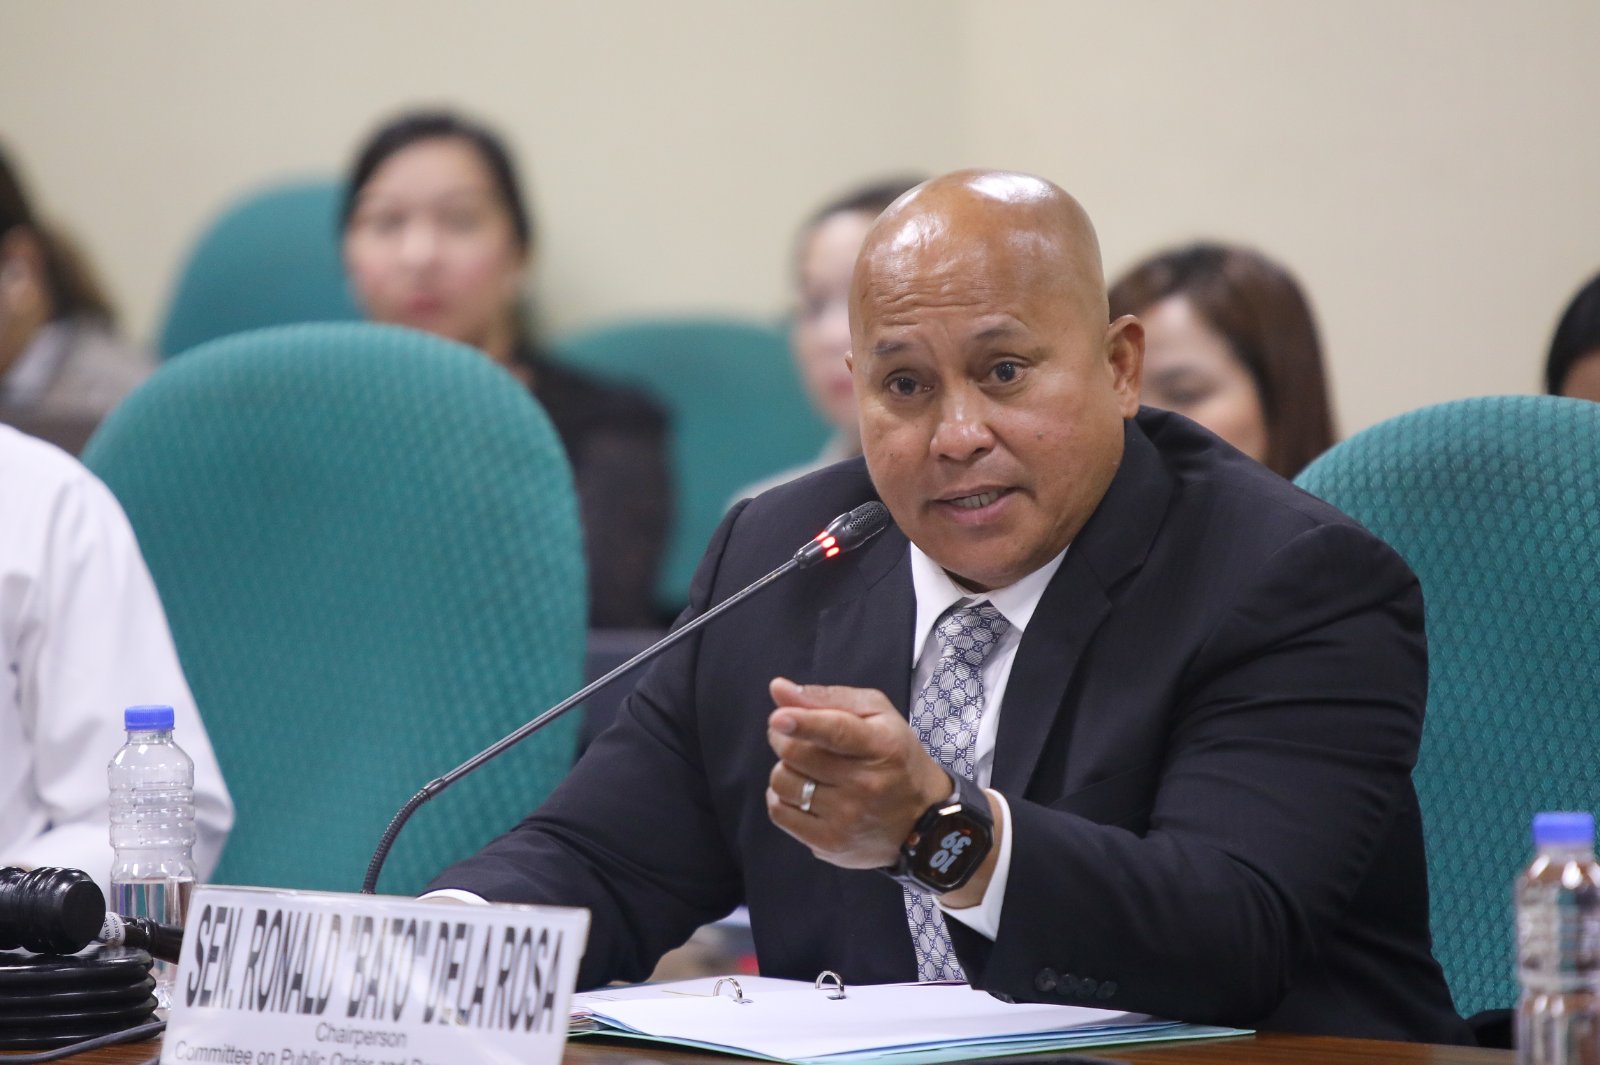 Senator Ronald “Bato” dela Rosa has invited vlogger, Maharlika, to personally attend a Senate hearing after fuming over the latter’s bribery allegations against him.